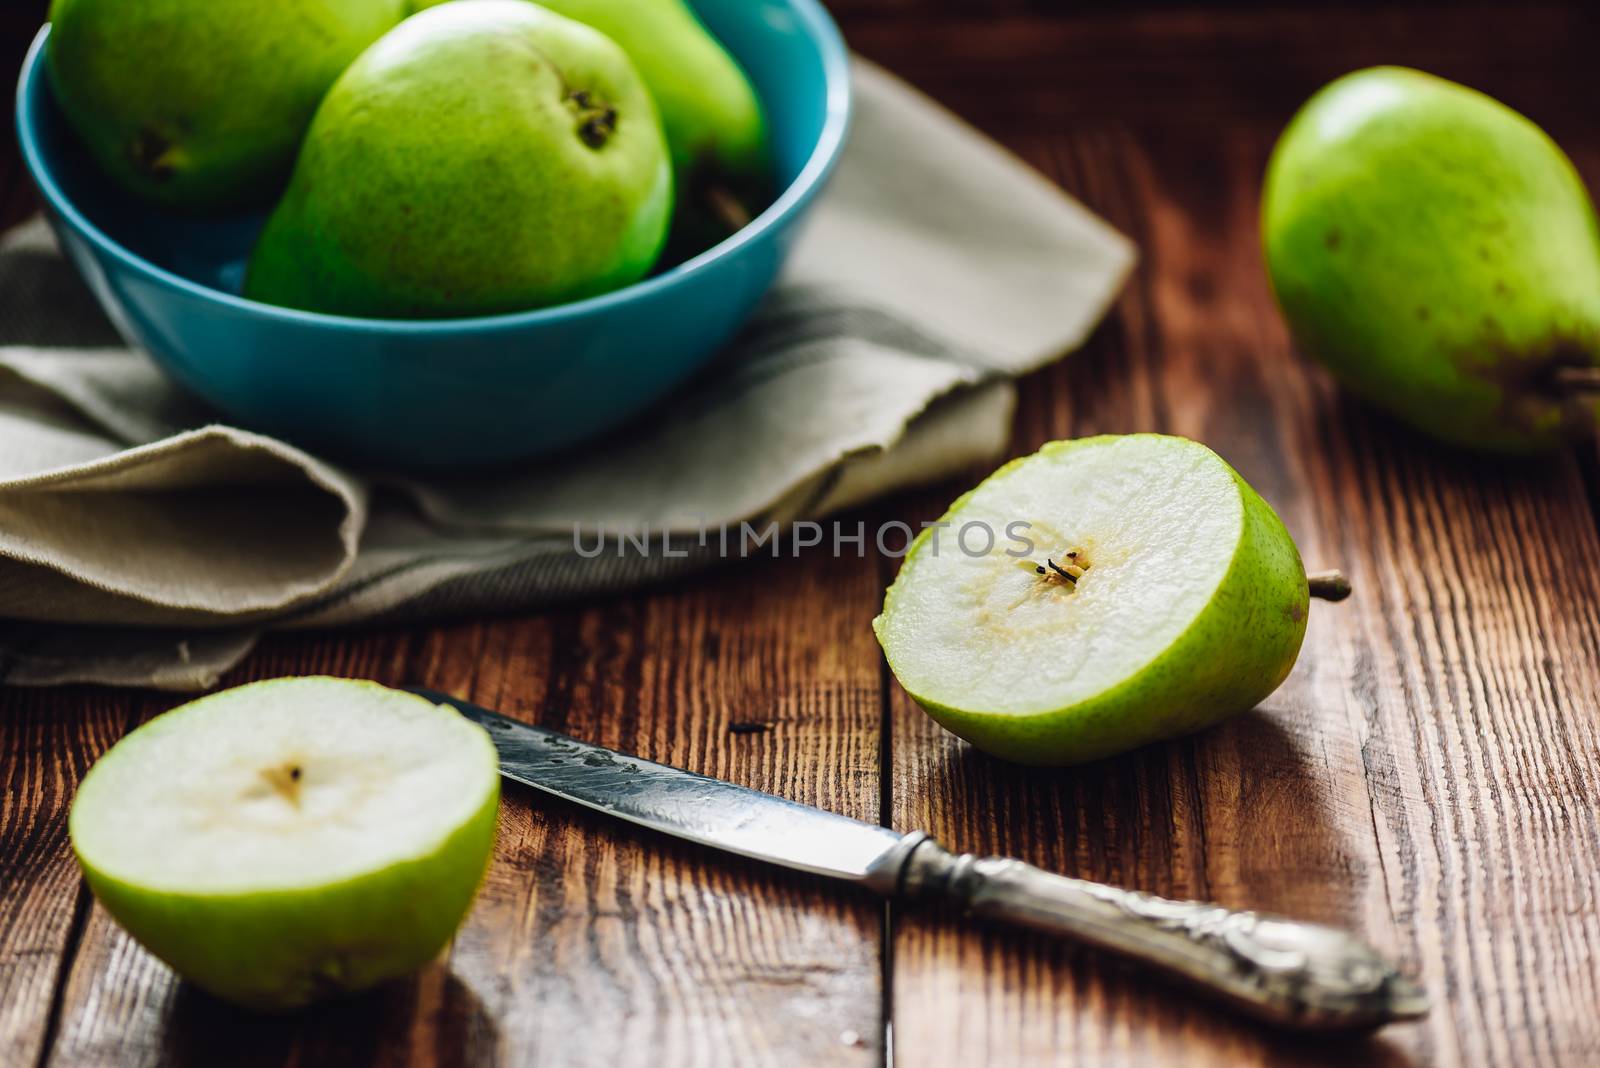 Sliced Pear with Knife and Some Pears on Background.